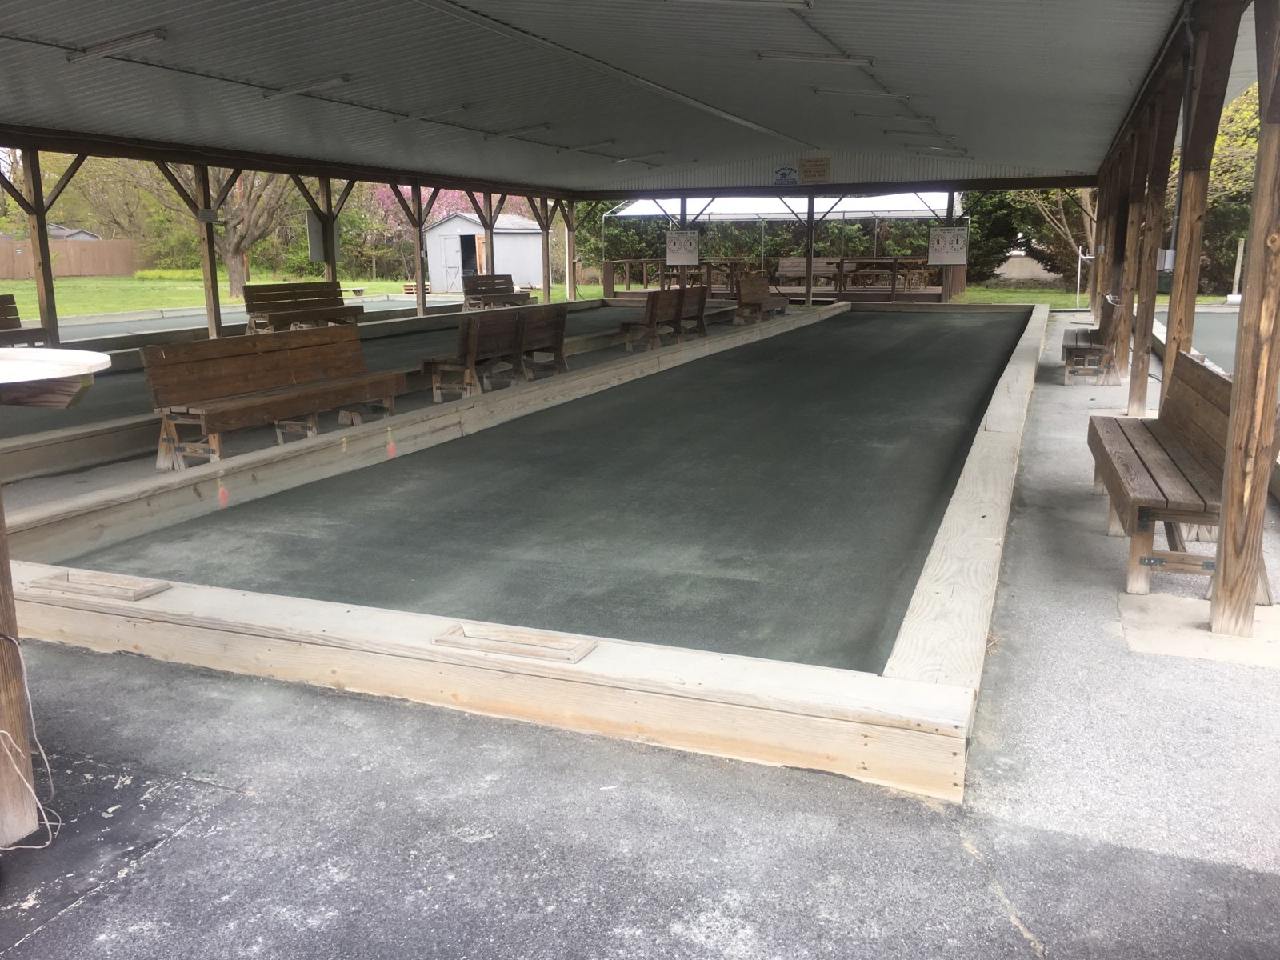 2021 St. Anthony’s High Stakes Bocce Tournament – New Castle, Delaware